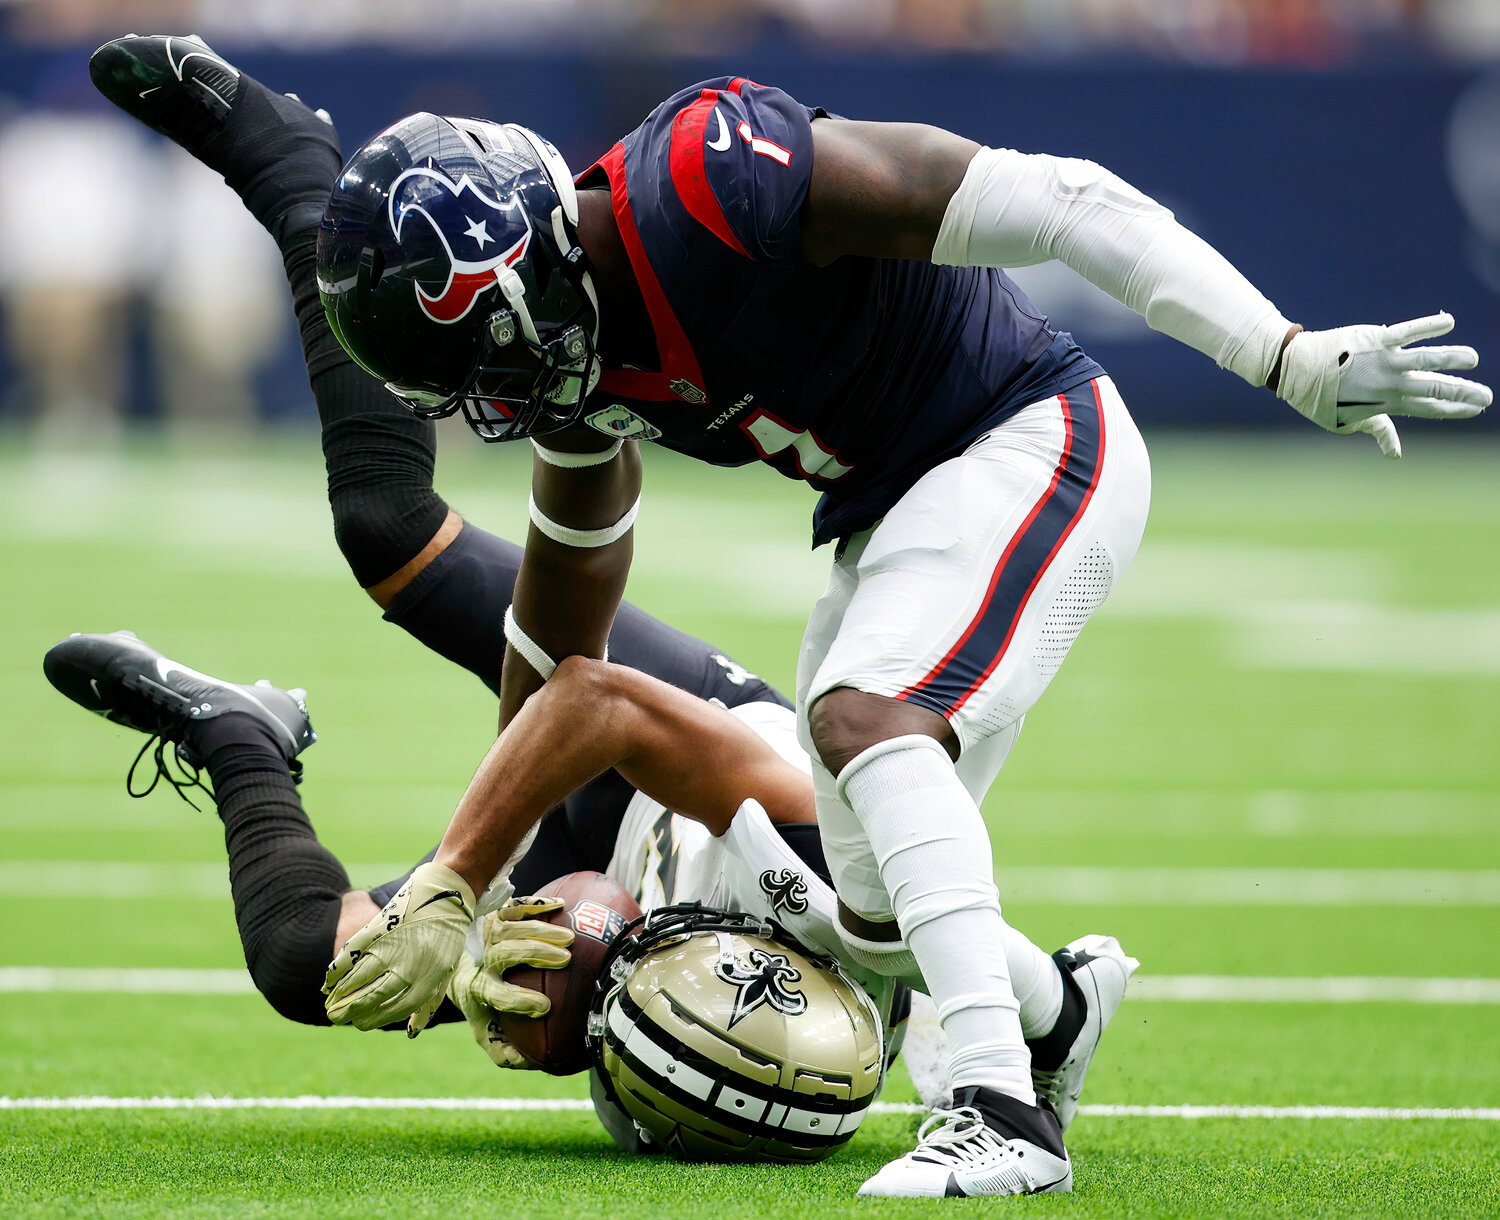 Saints wide receiver Chris Olave (12) brings in a 24-yard pass over Texans safety Jimmie Ward (1) for a first down at the Texans’ 14-yard line during an NFL game between the Texans and the Saints on October 15, 2023 in Houston. The Texans won, 20-13.